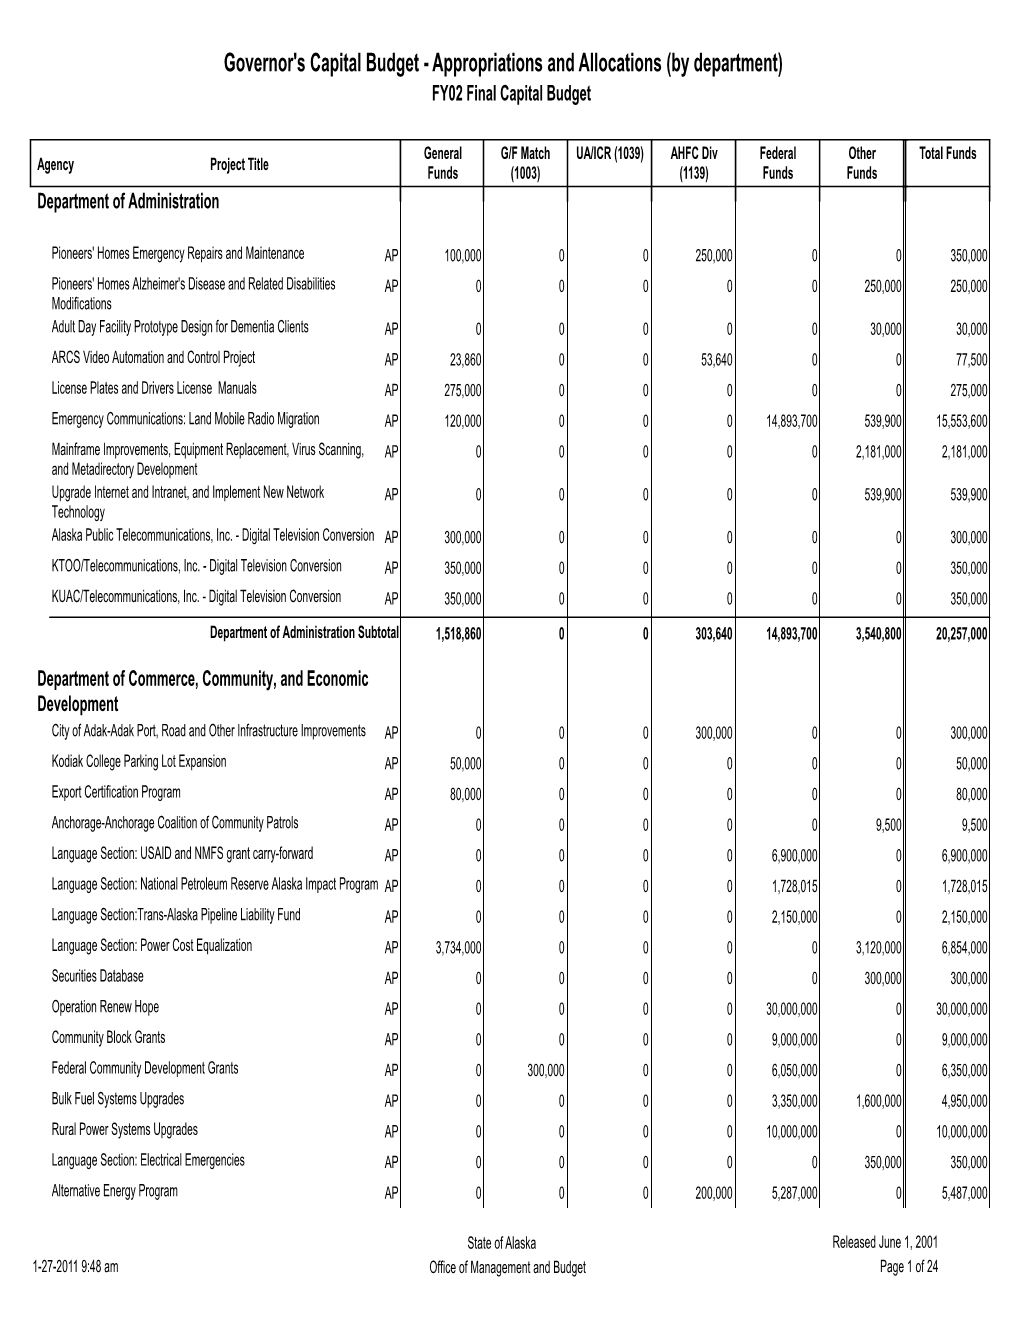 Governor's Capital Budget - Appropriations and Allocations (By Department) FY02 Final Capital Budget